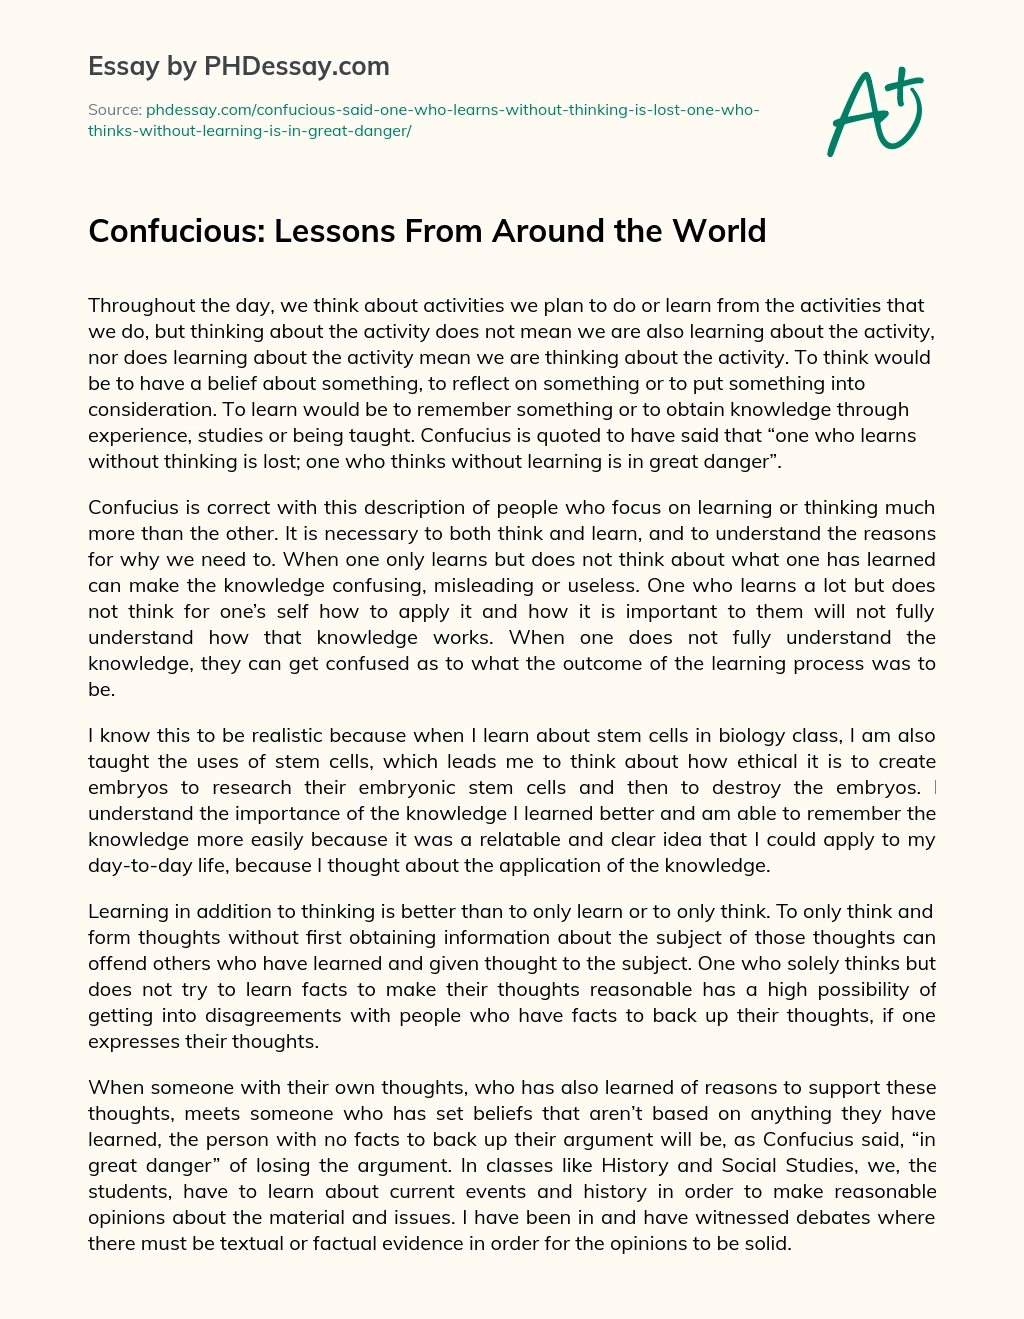 Confucious: Lessons From Around the World essay